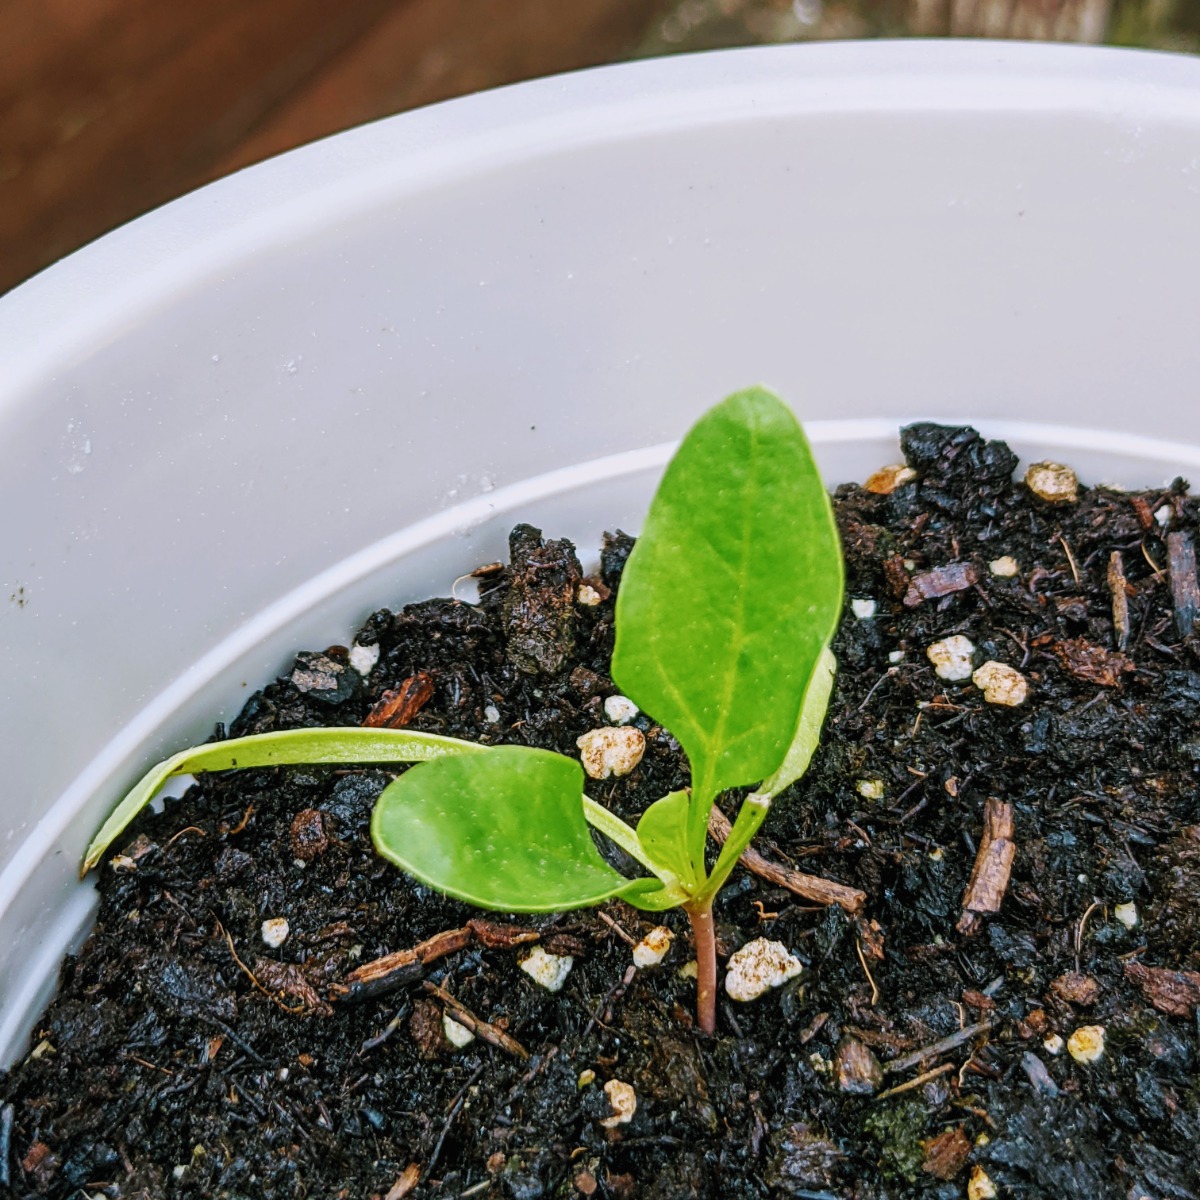 Baby Spinach Seedling in Container - Growing Spinach from Seed